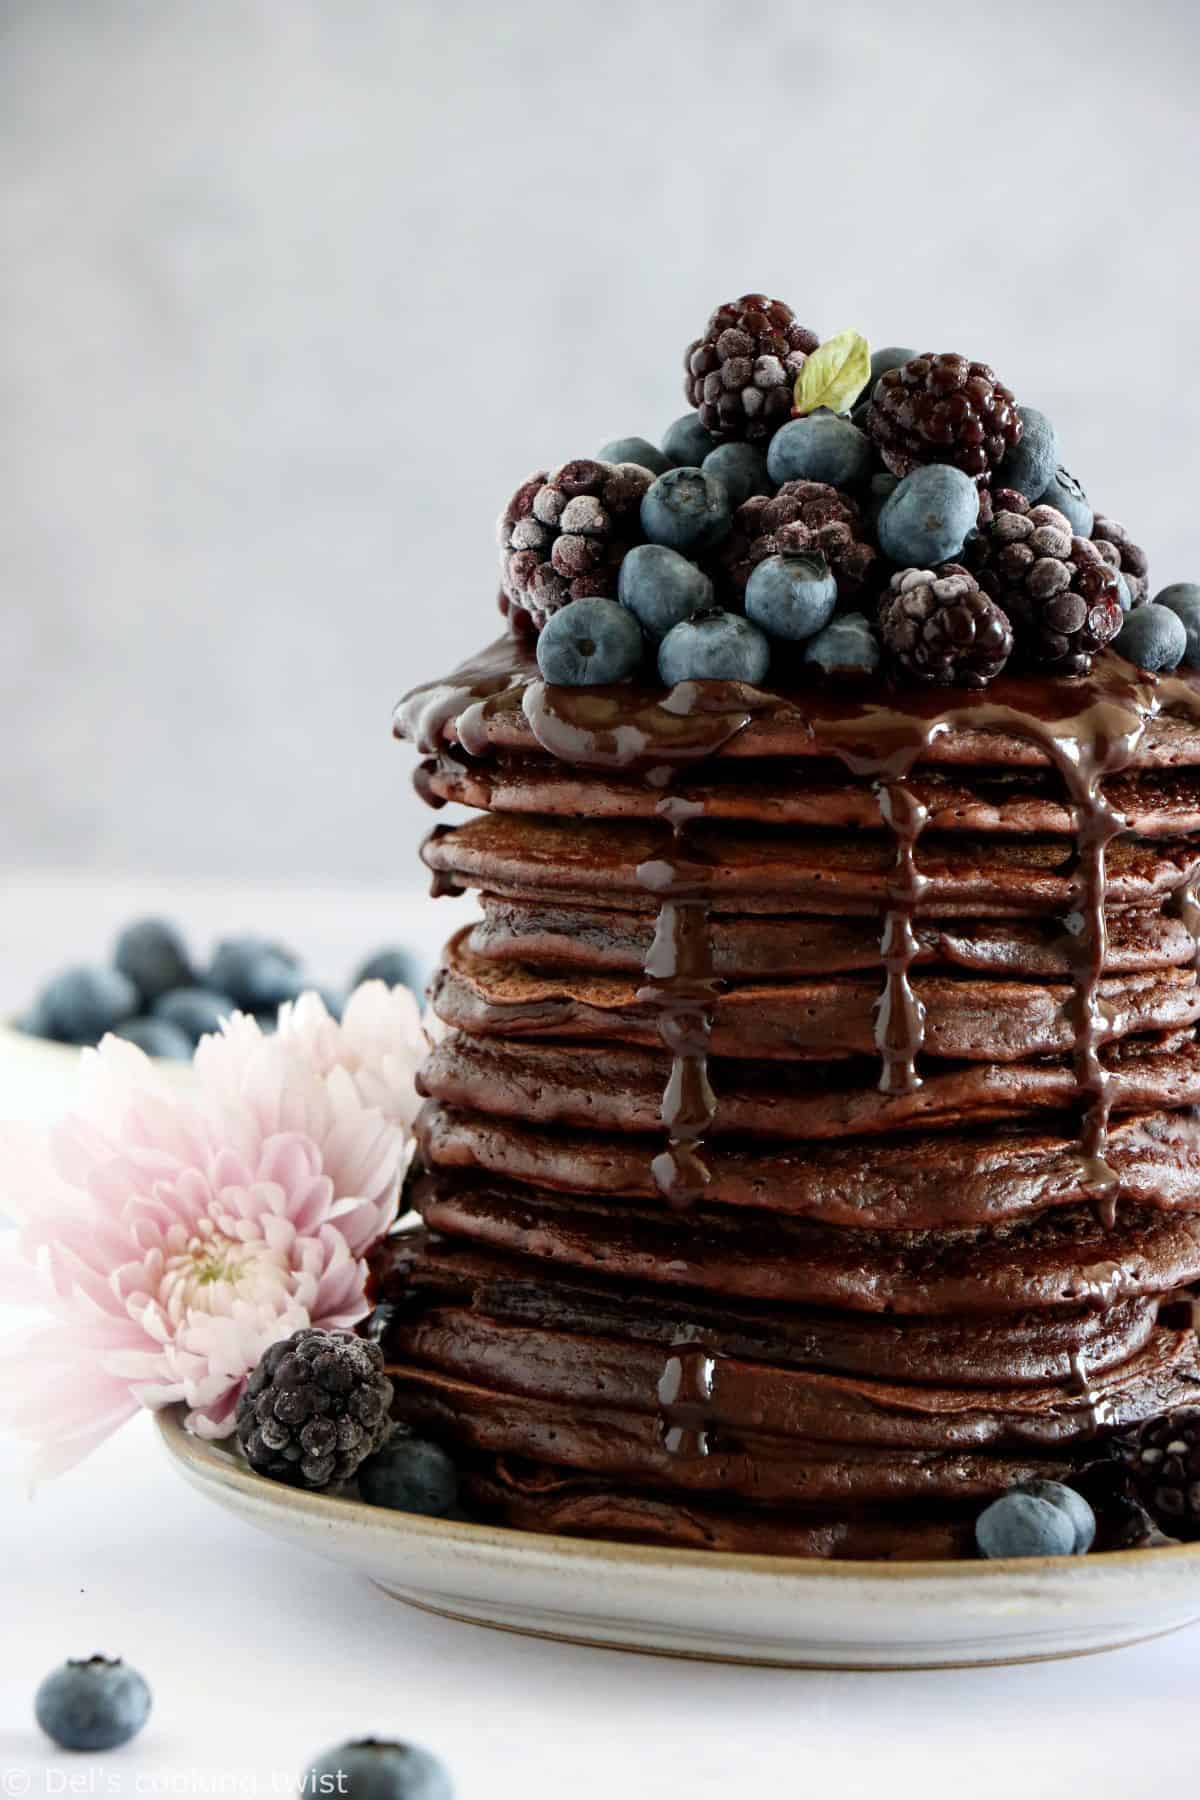 Chocolate Pancakes: Recipes, Variations, and Healthy Tips